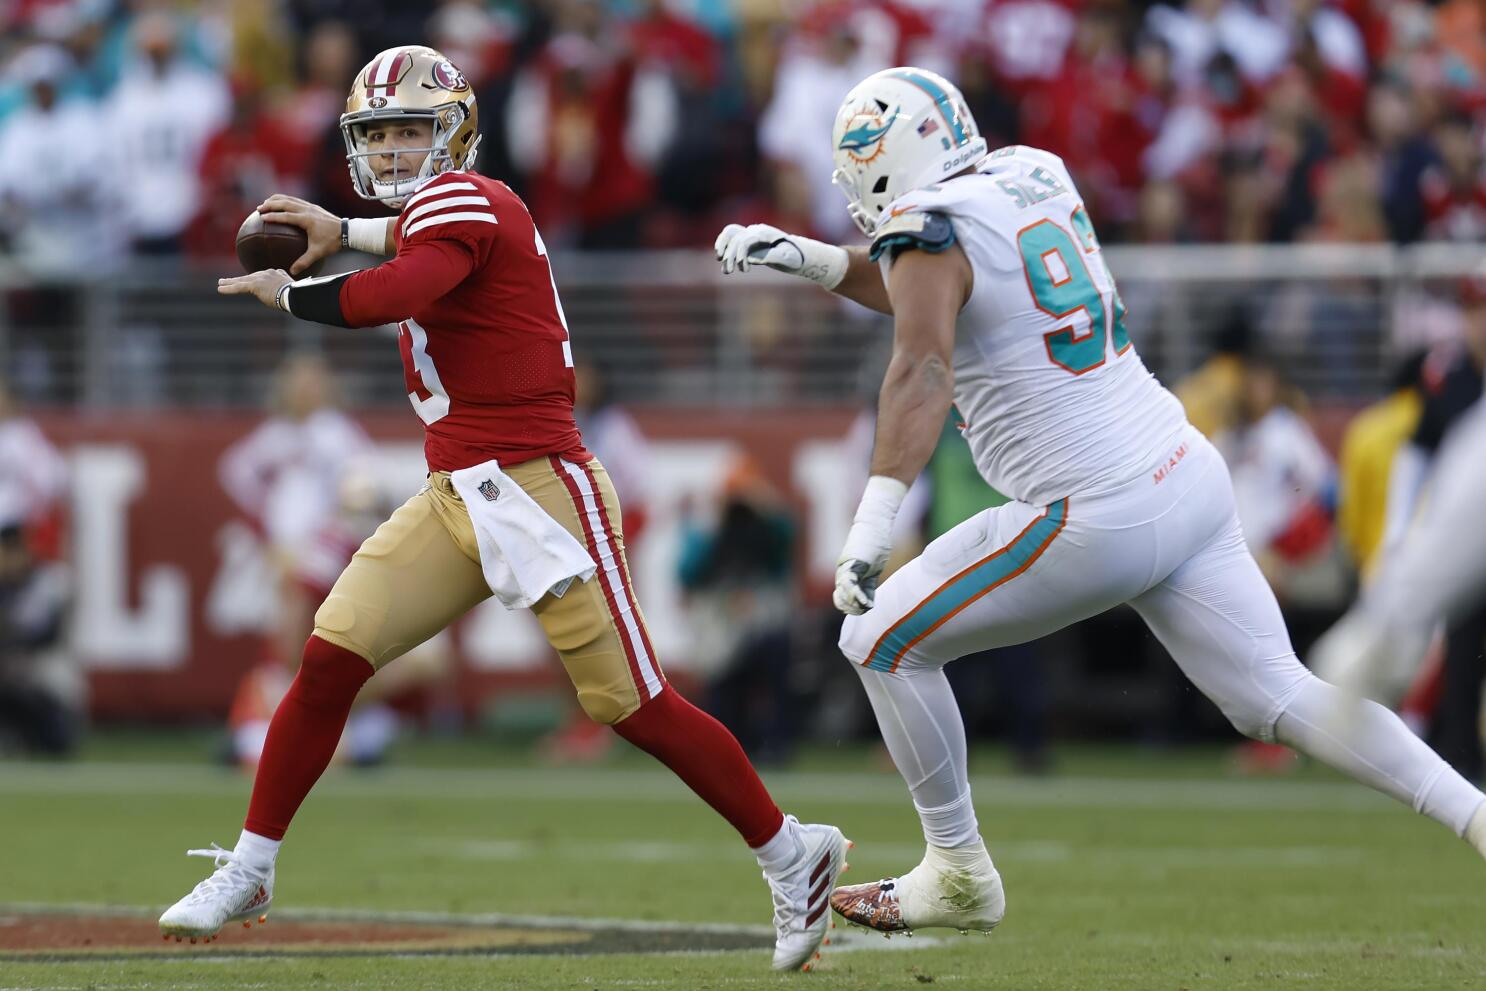 49ers defeat Dolphins but lose QB Jimmy Garoppolo for the season